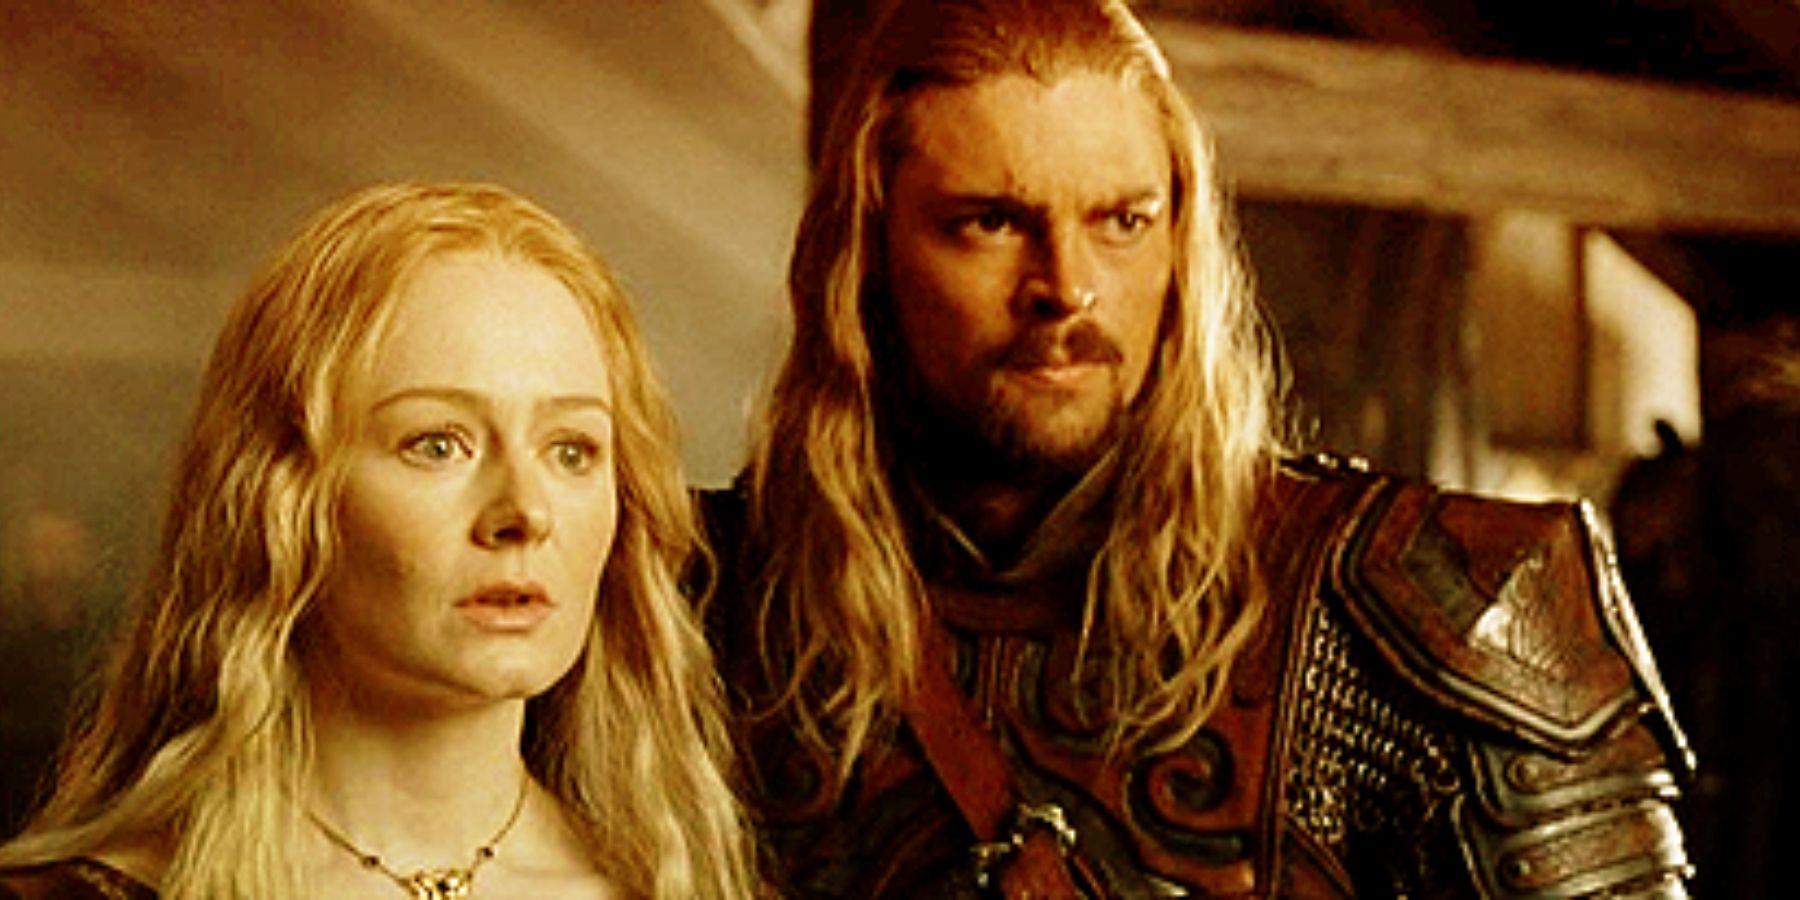 Eomer_Eowyn_Lord of the Rings